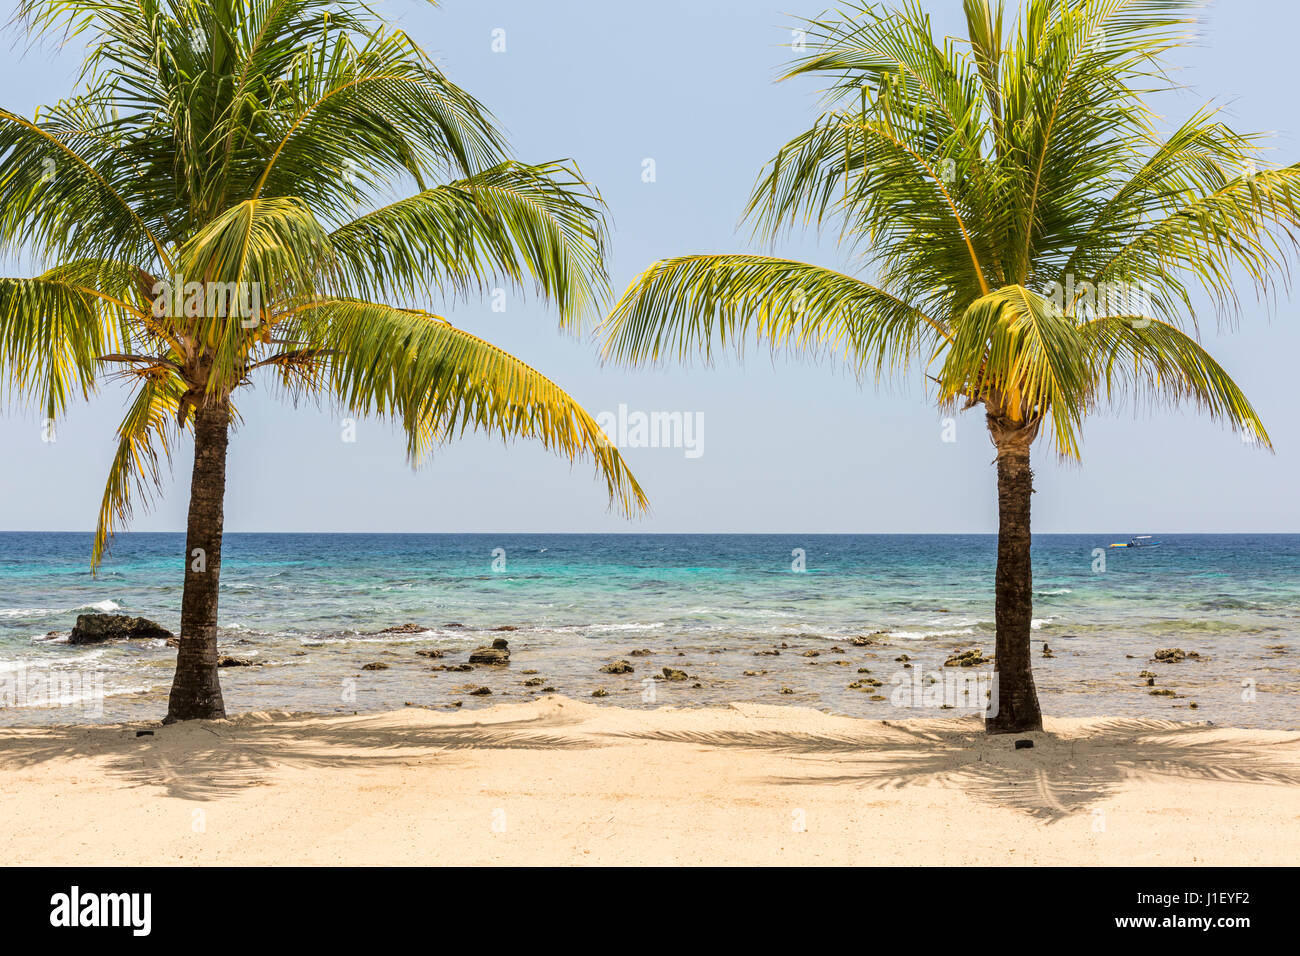 A pair of coconut palm trees on the beautiful sandy beach and coral reef at Lighthouse Point near the Meridian Resort in Roatan, Honduras. Stock Photo